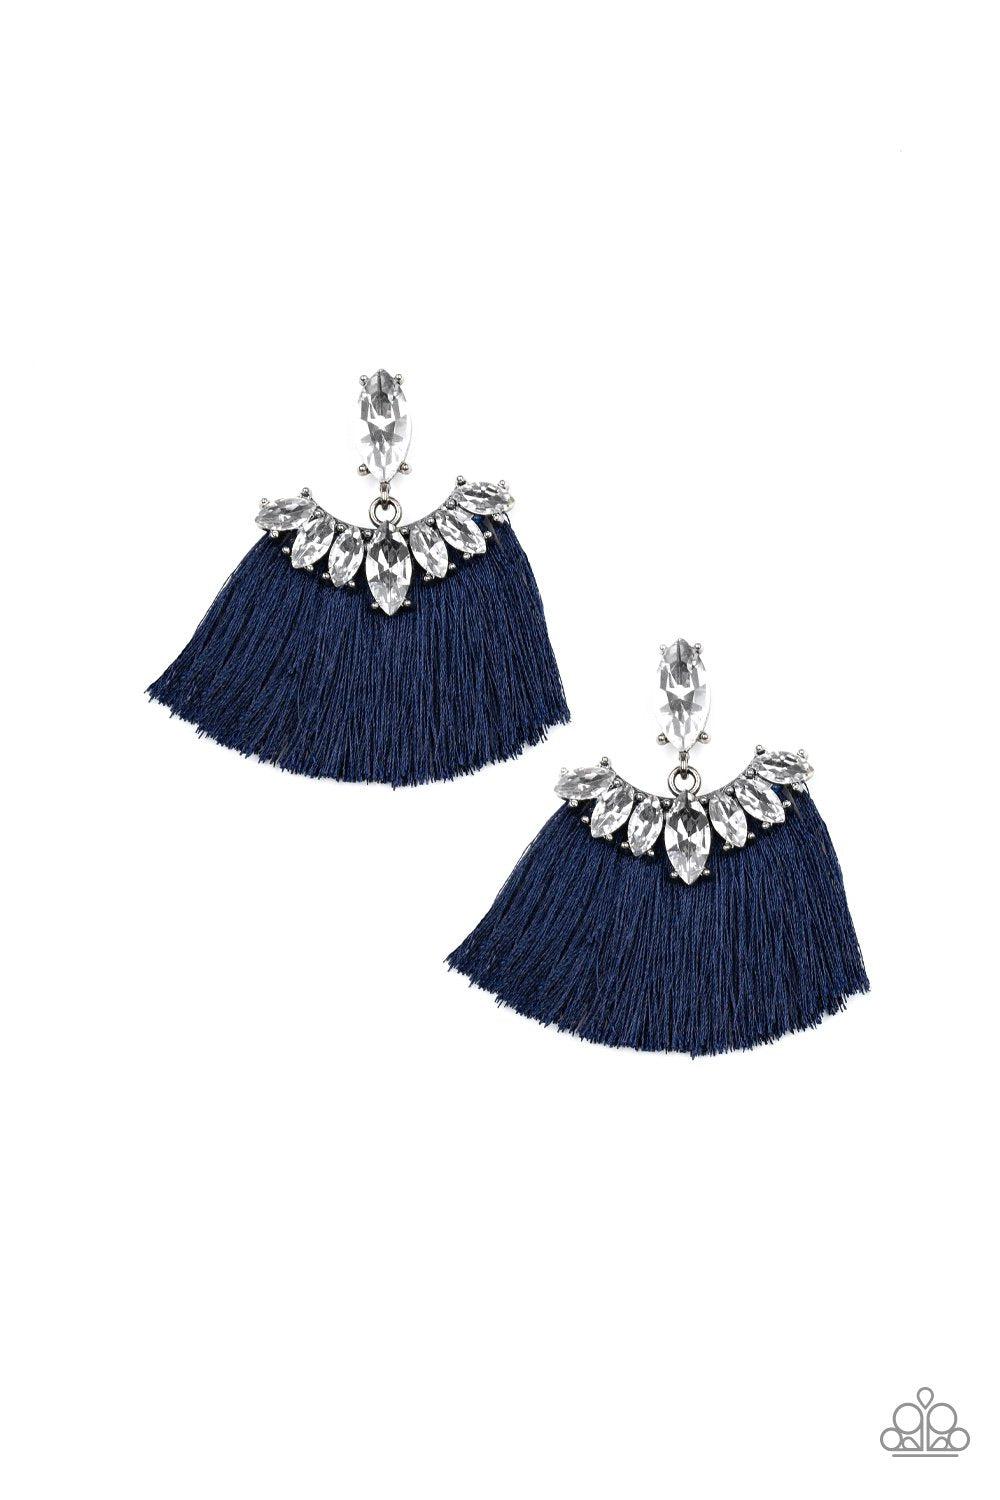 Formal Flair Navy Blue Fringe Earrings - Paparazzi Accessories-CarasShop.com - $5 Jewelry by Cara Jewels